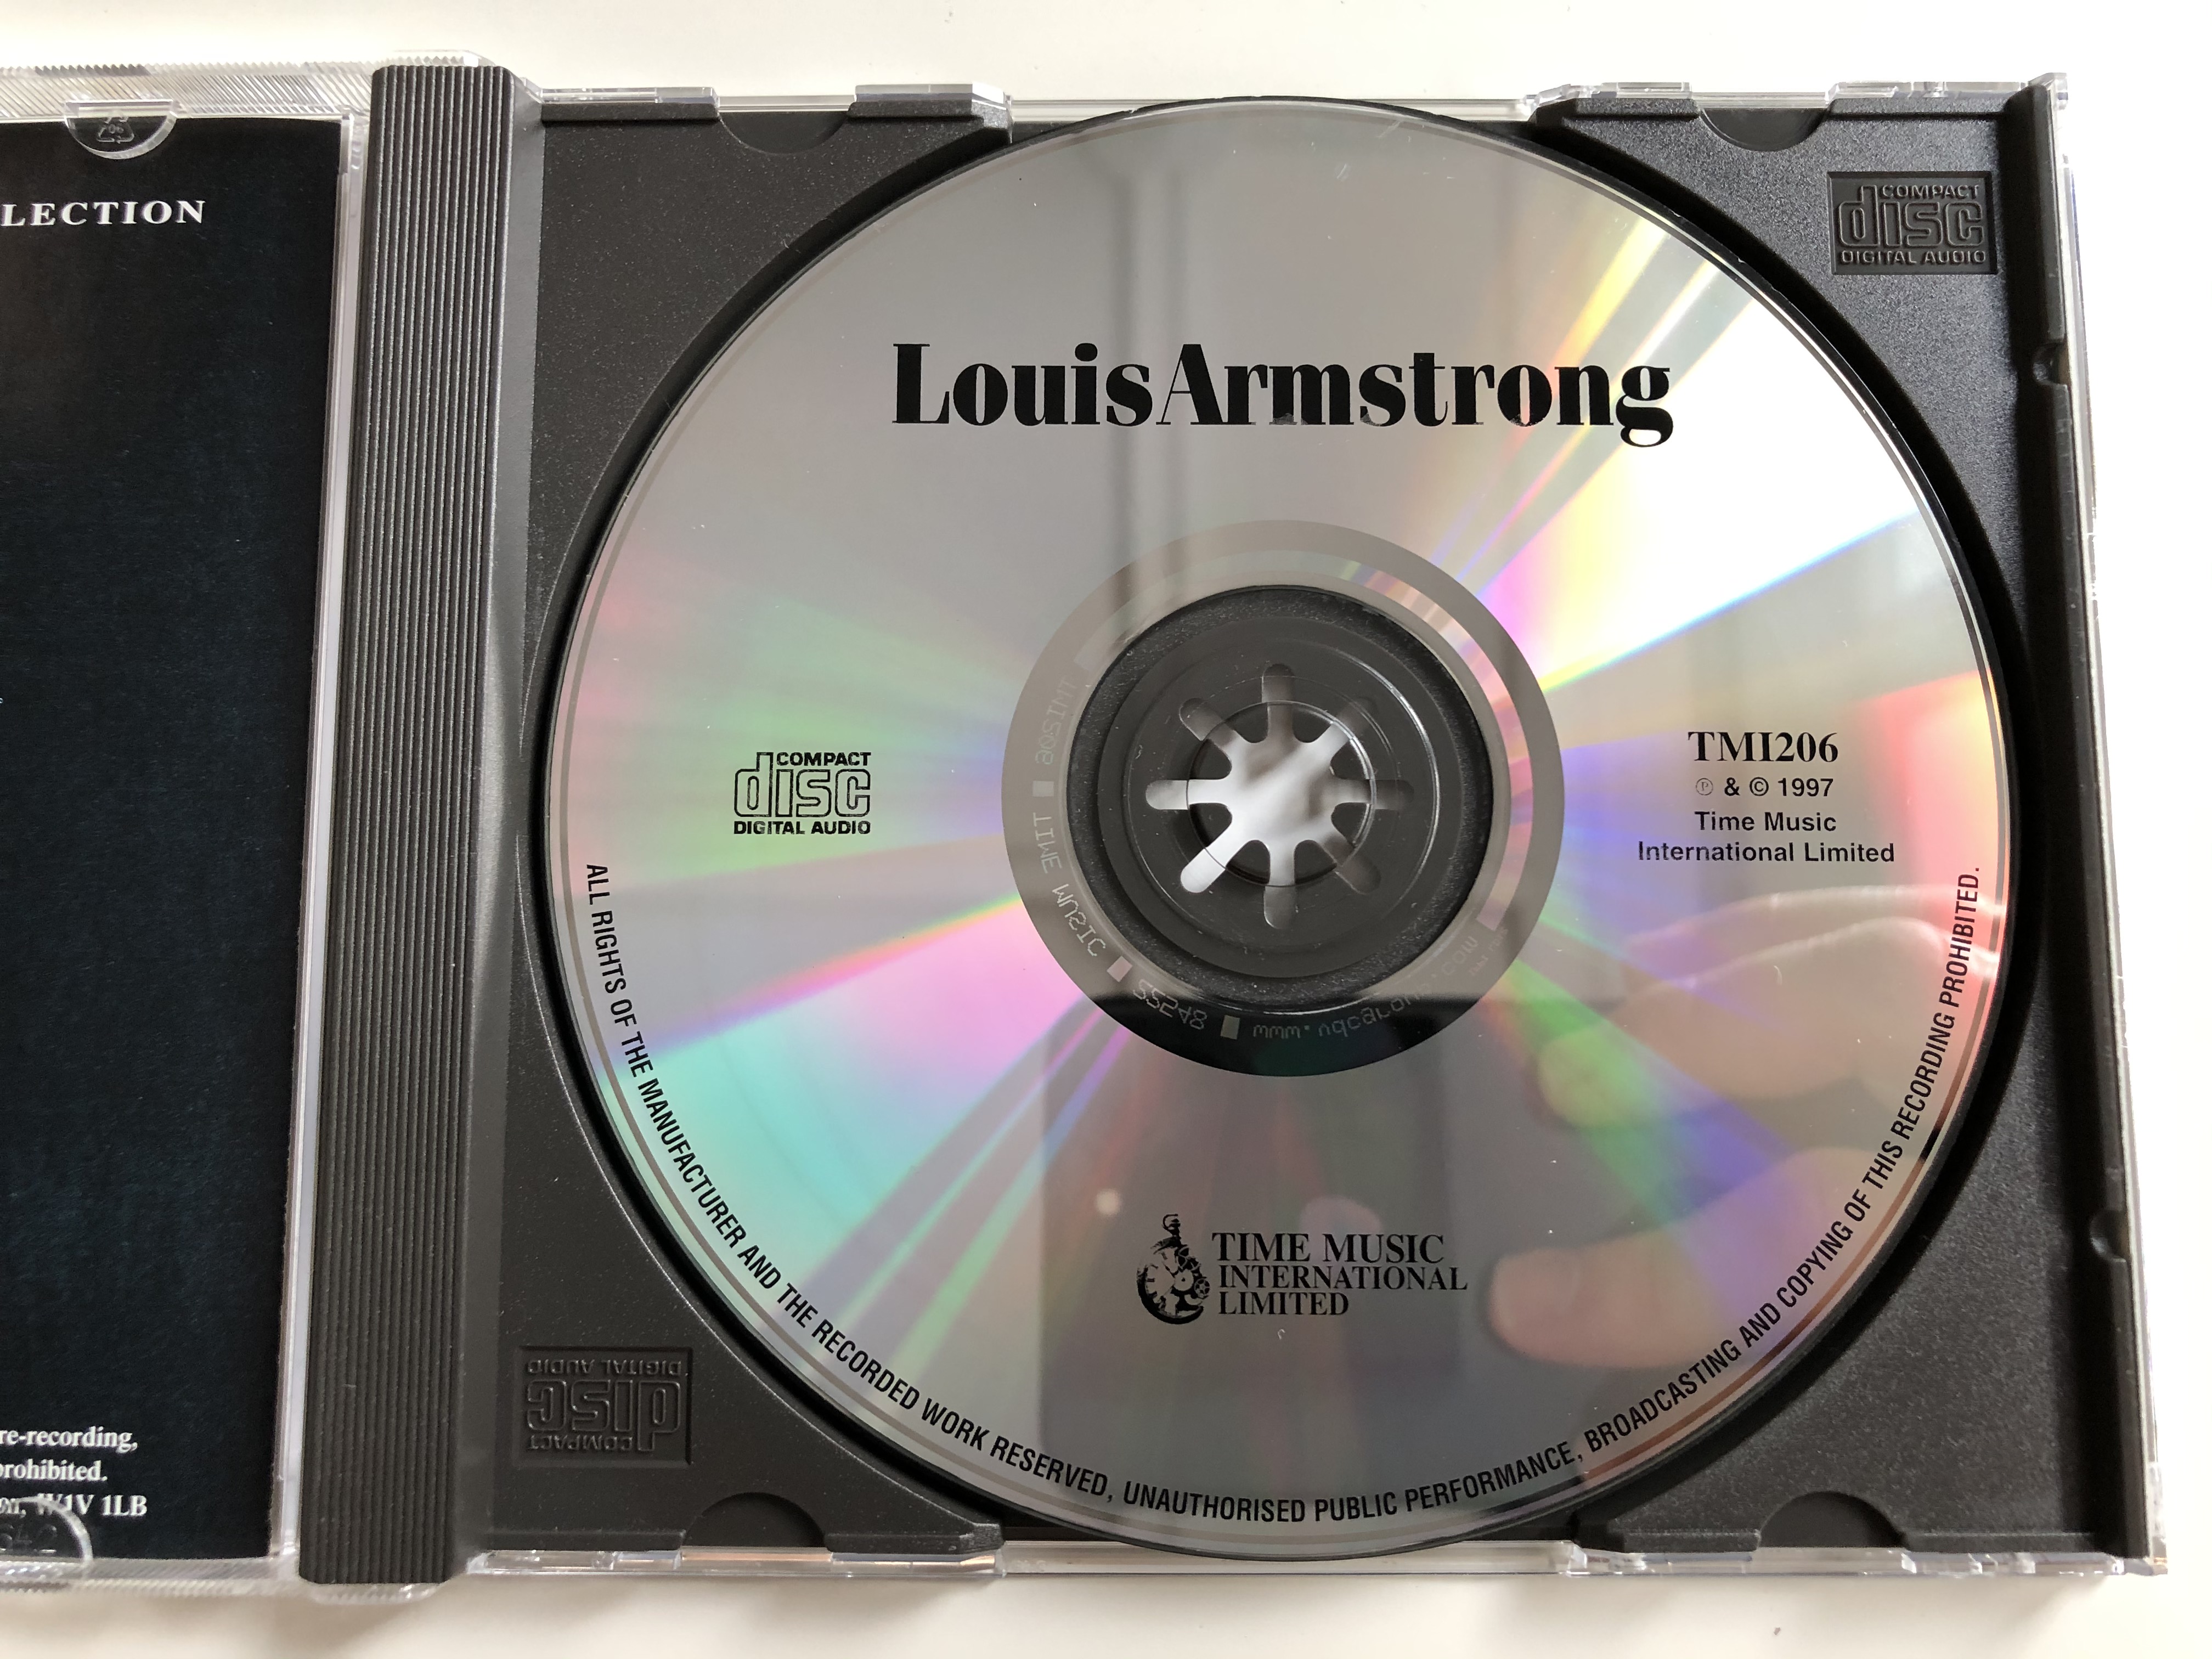 louis-armstrong-featuring-i-ve-got-the-world-on-a-string-basin-street-blues-st-louis-blues-time-music-international-limited-audio-cd-1997-tmi206-3-.jpg